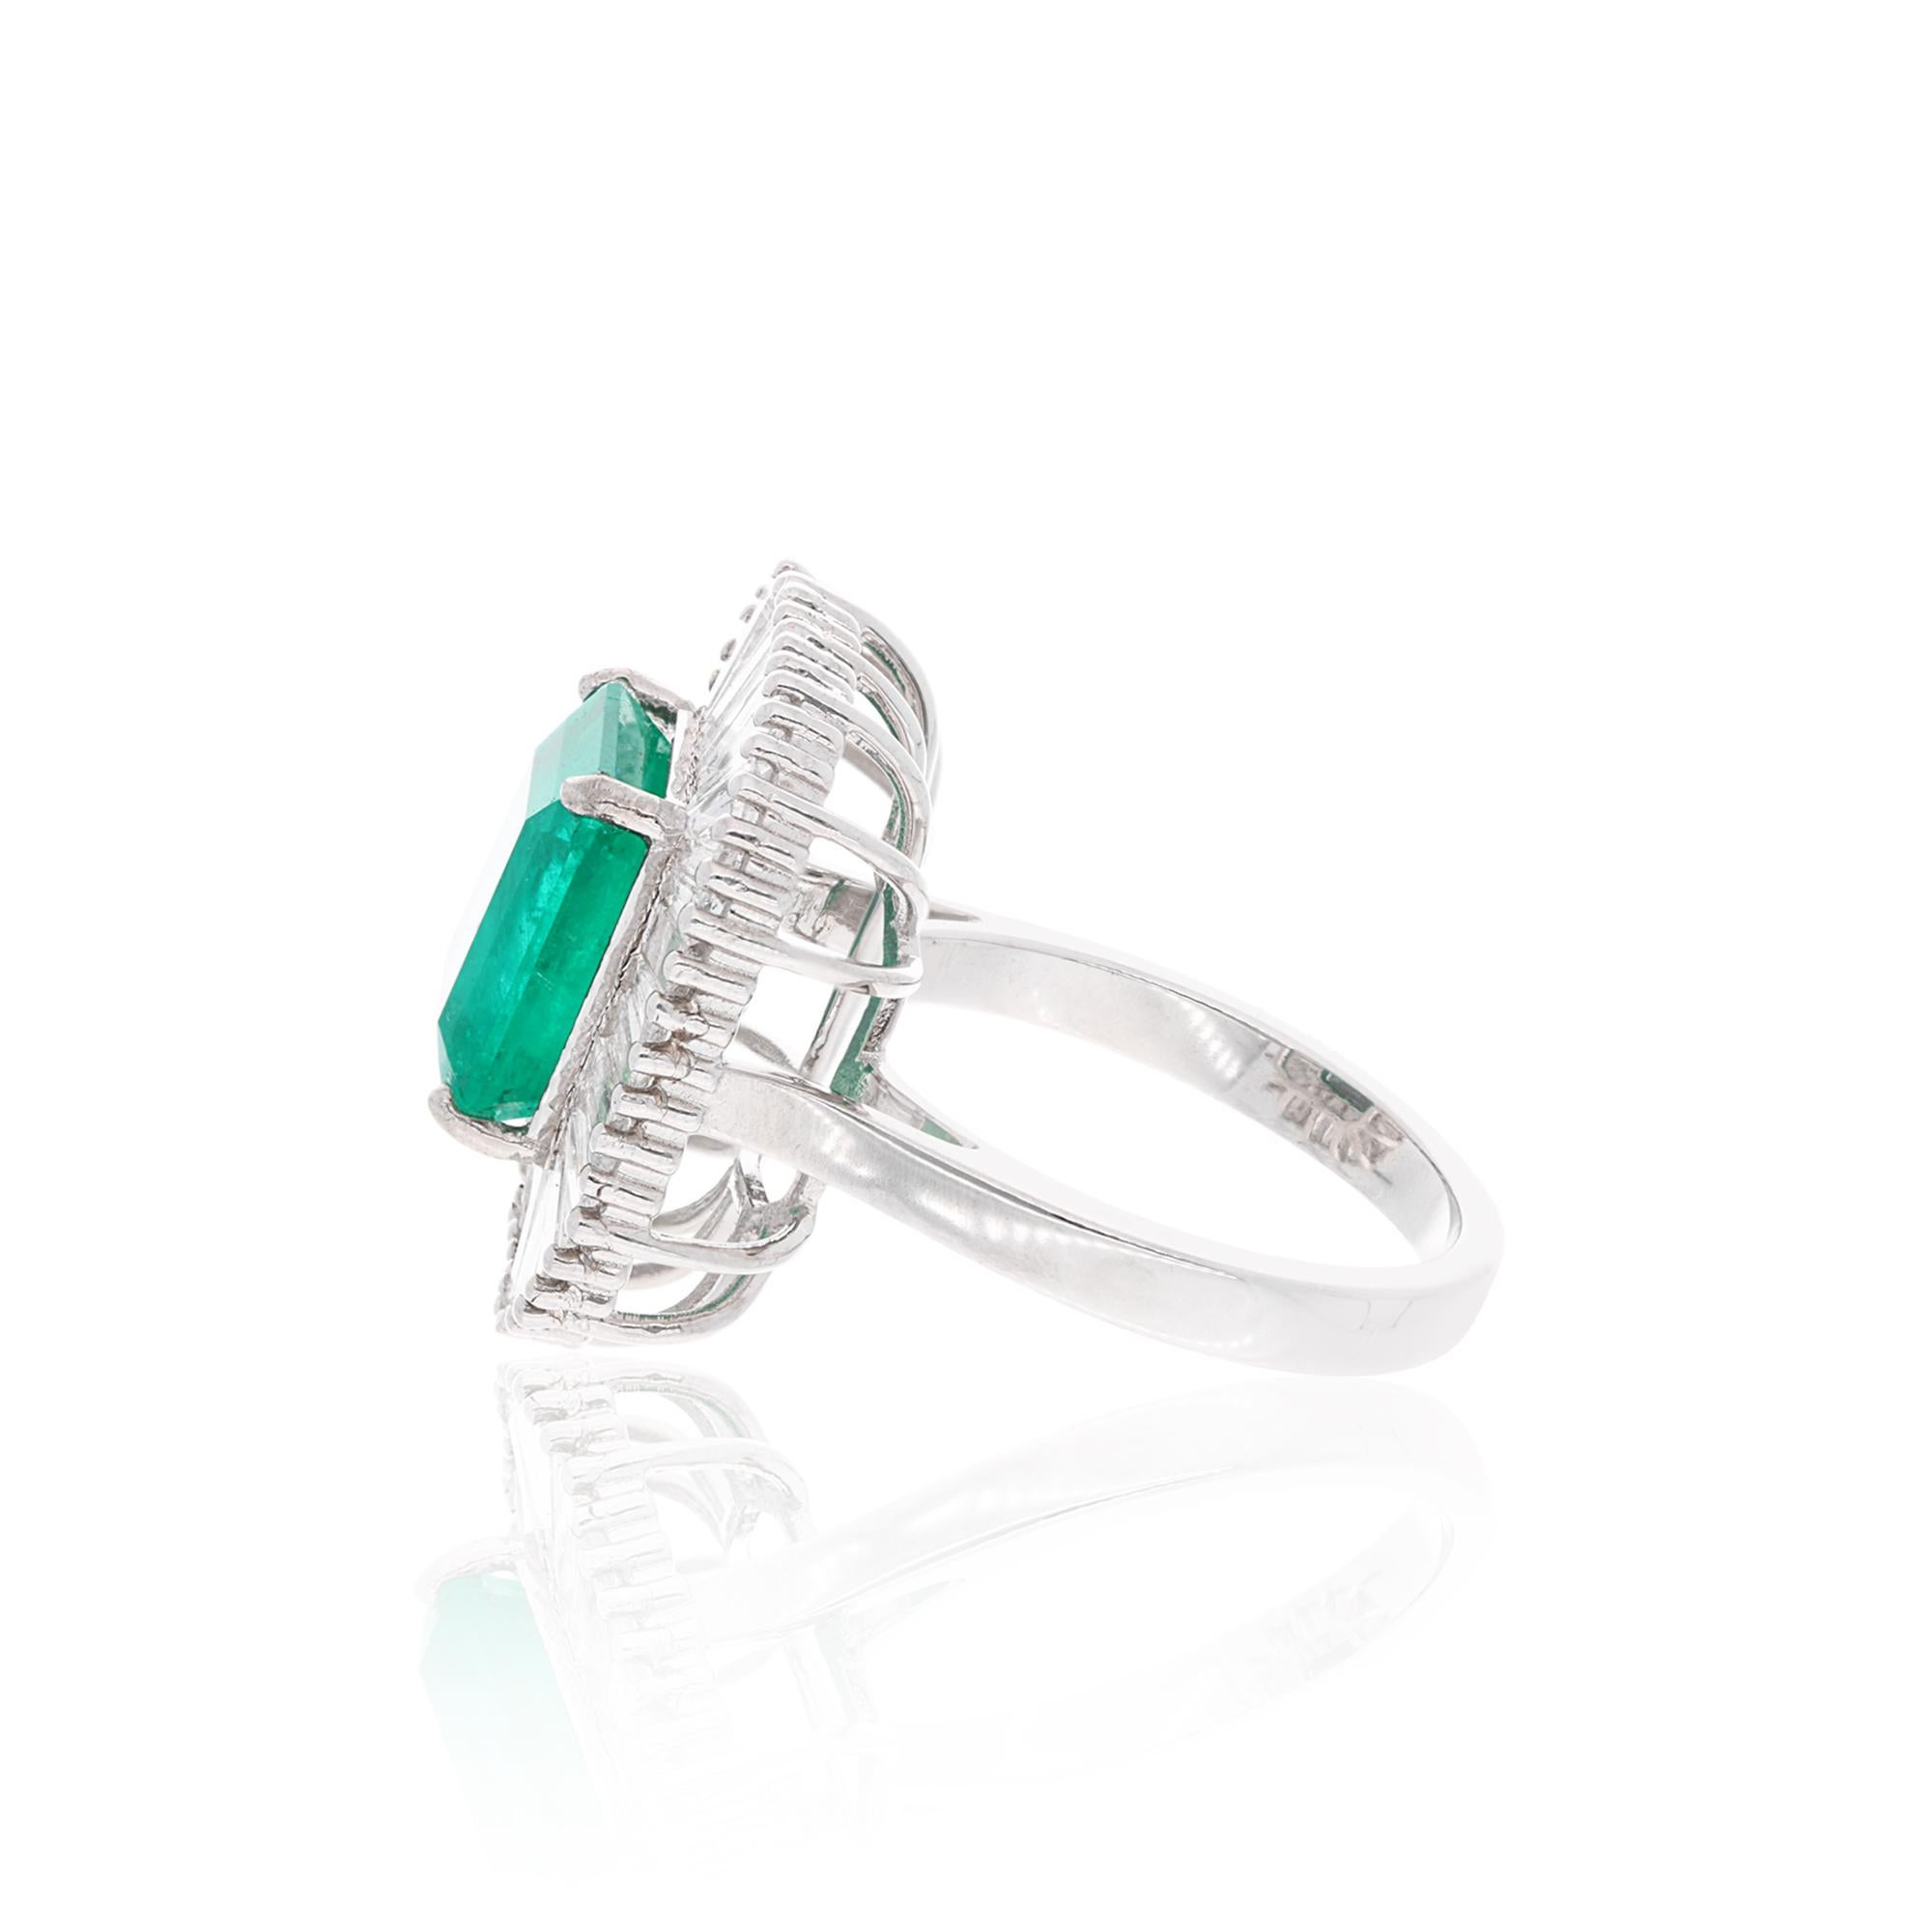 For Sale:  Natural Emerald Gemstone Cocktail Ring Baguette Diamond 18k White Gold Jewelry 2